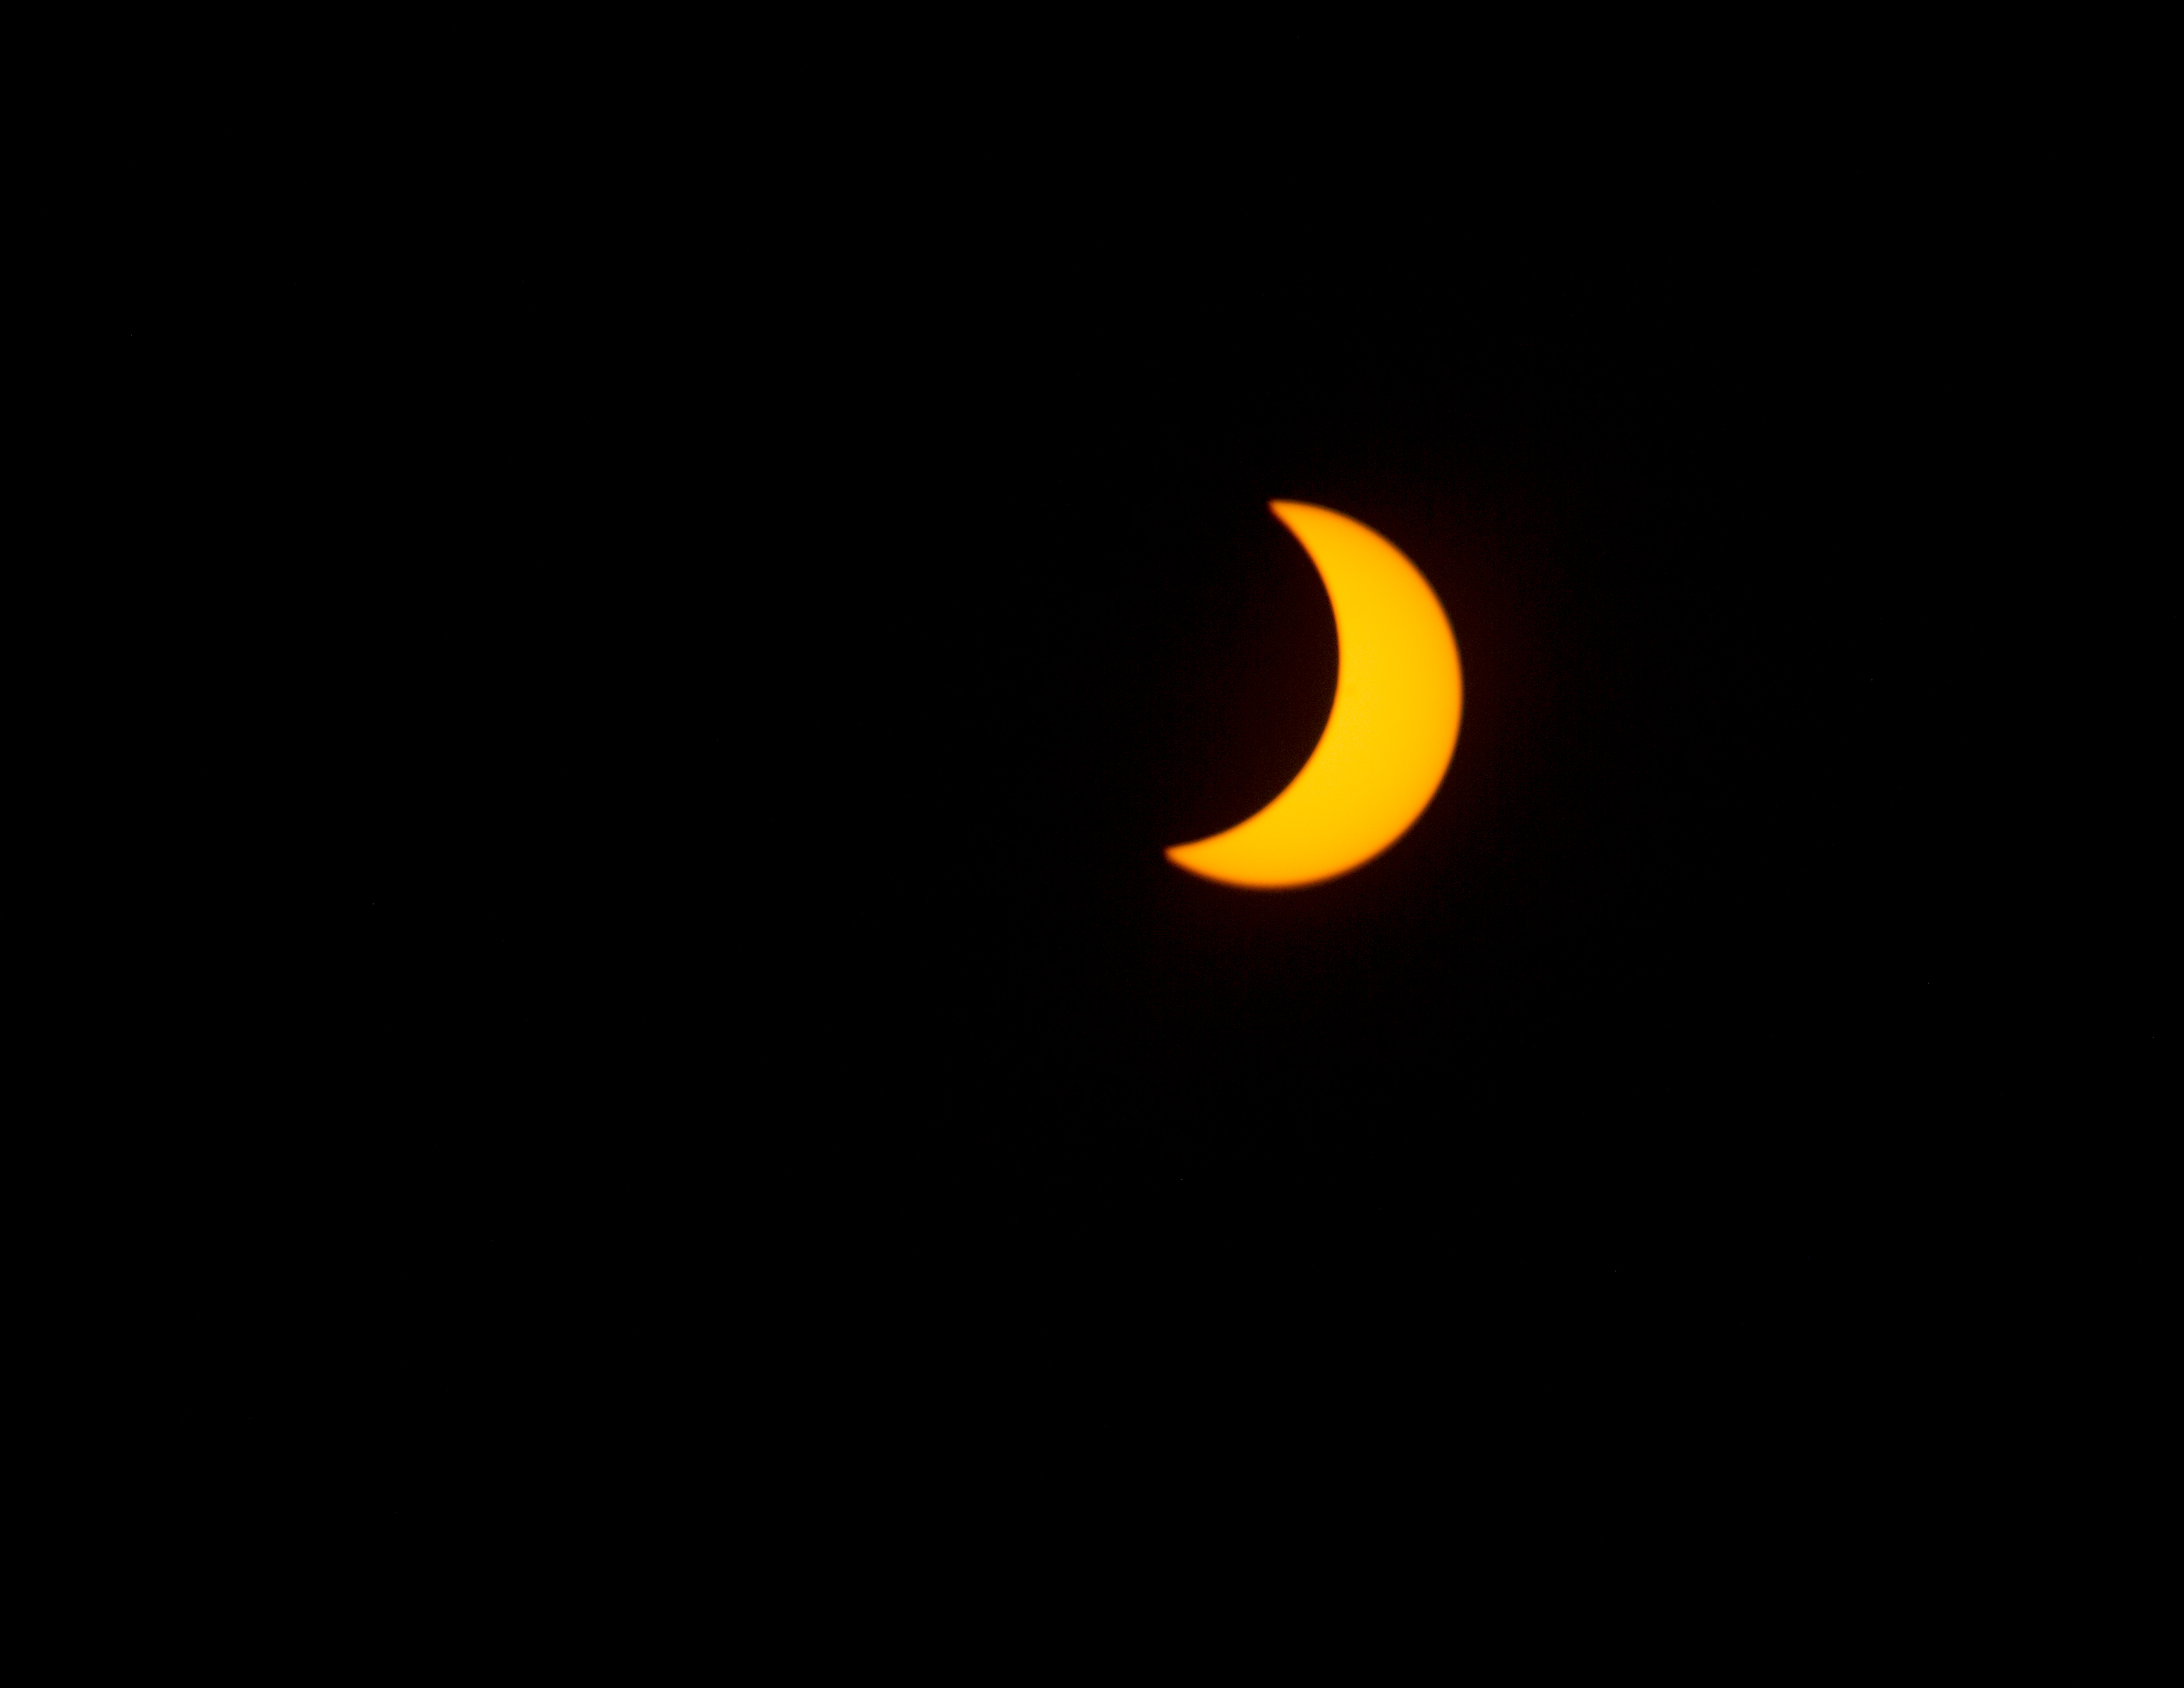 Highlights of Monday’s eclipse